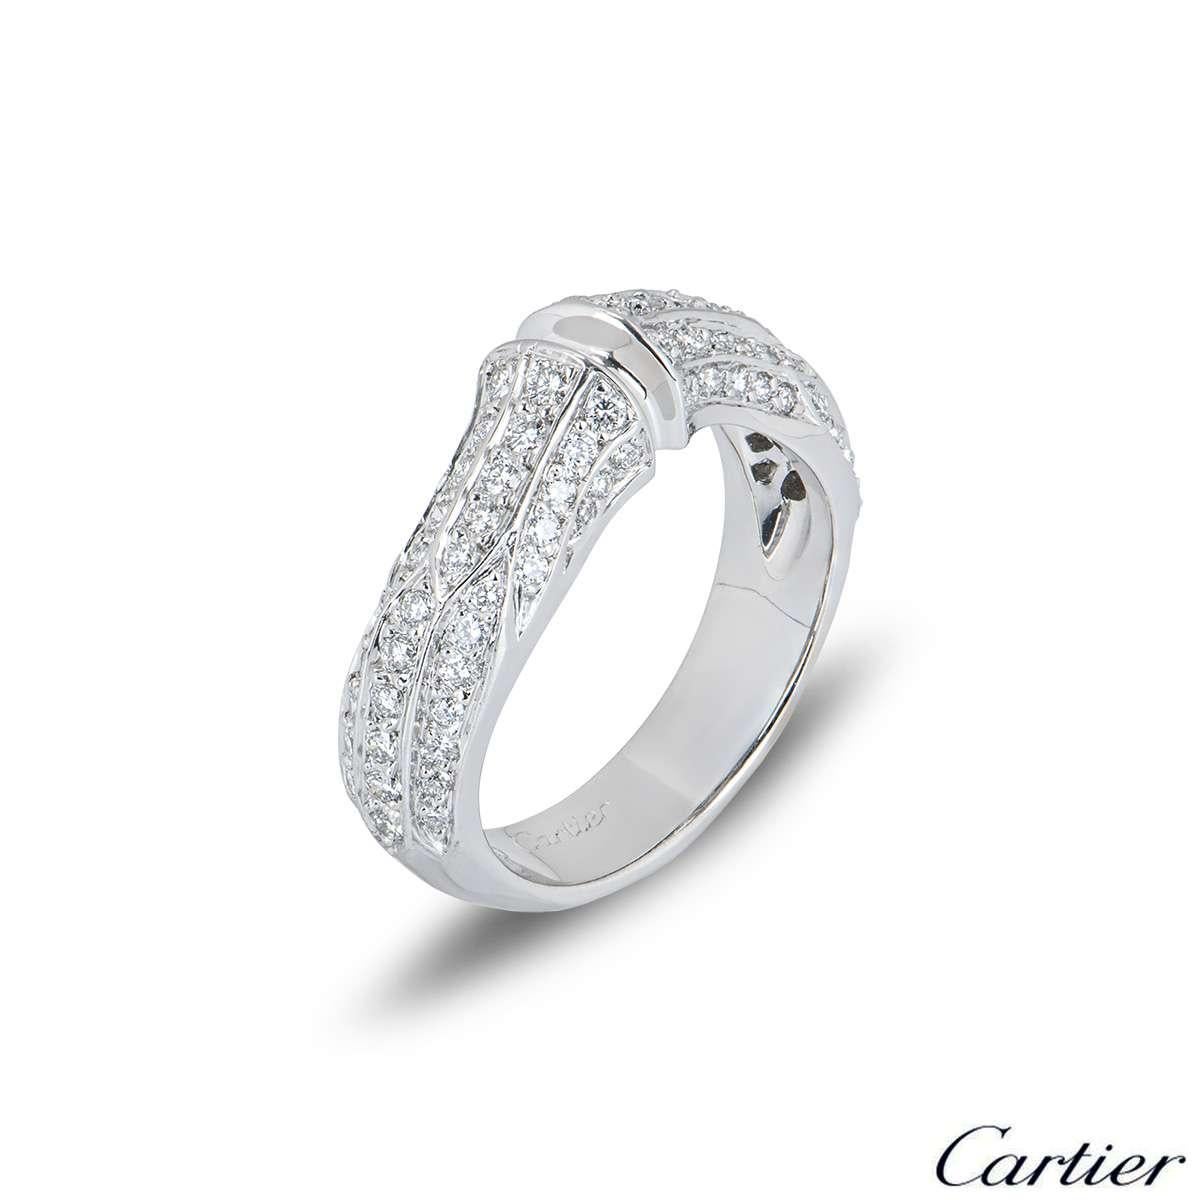 An 18k white gold diamond set ring from the Cartier Bamboo collection. The ring is set to the front with a bamboo design, pave set with round brilliant cut diamonds totalling approximately 0.82ct. The ring measures 6mm in width and features a